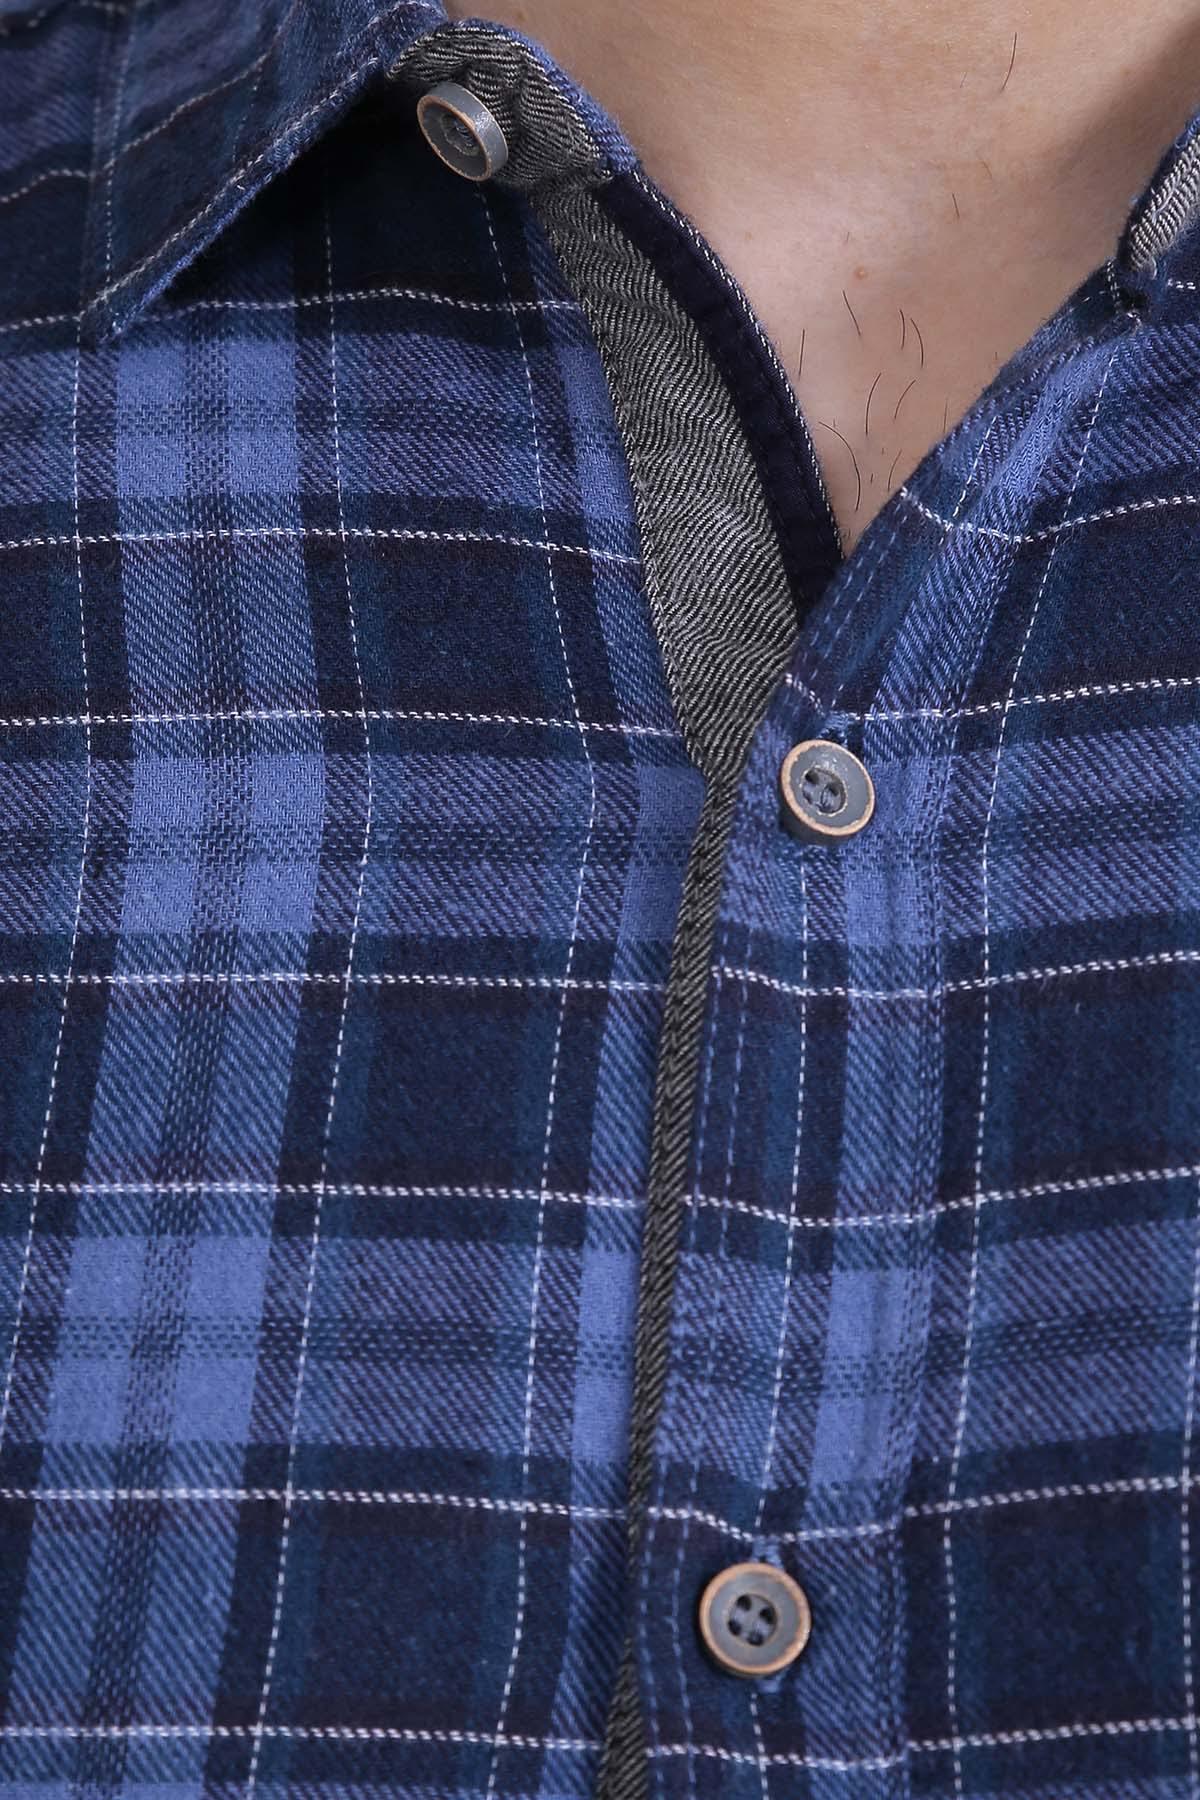 CASUAL SHIRT FULL SLEEVE SLIM FIT BLUE CHECK at Charcoal Clothing